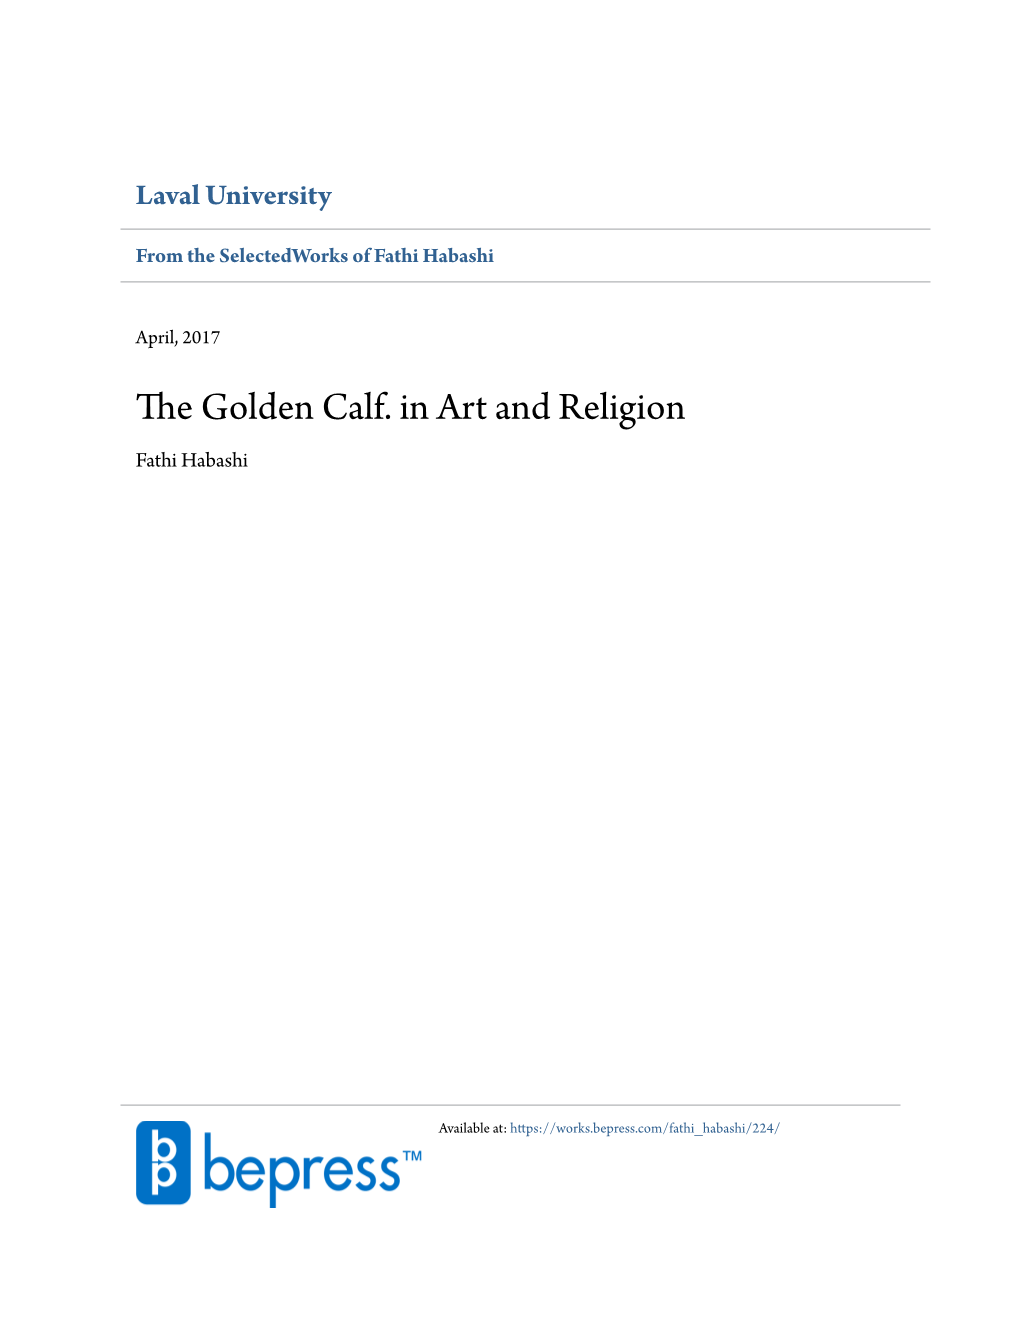 The Golden Calf. in Art and Religion Fathi Habashi